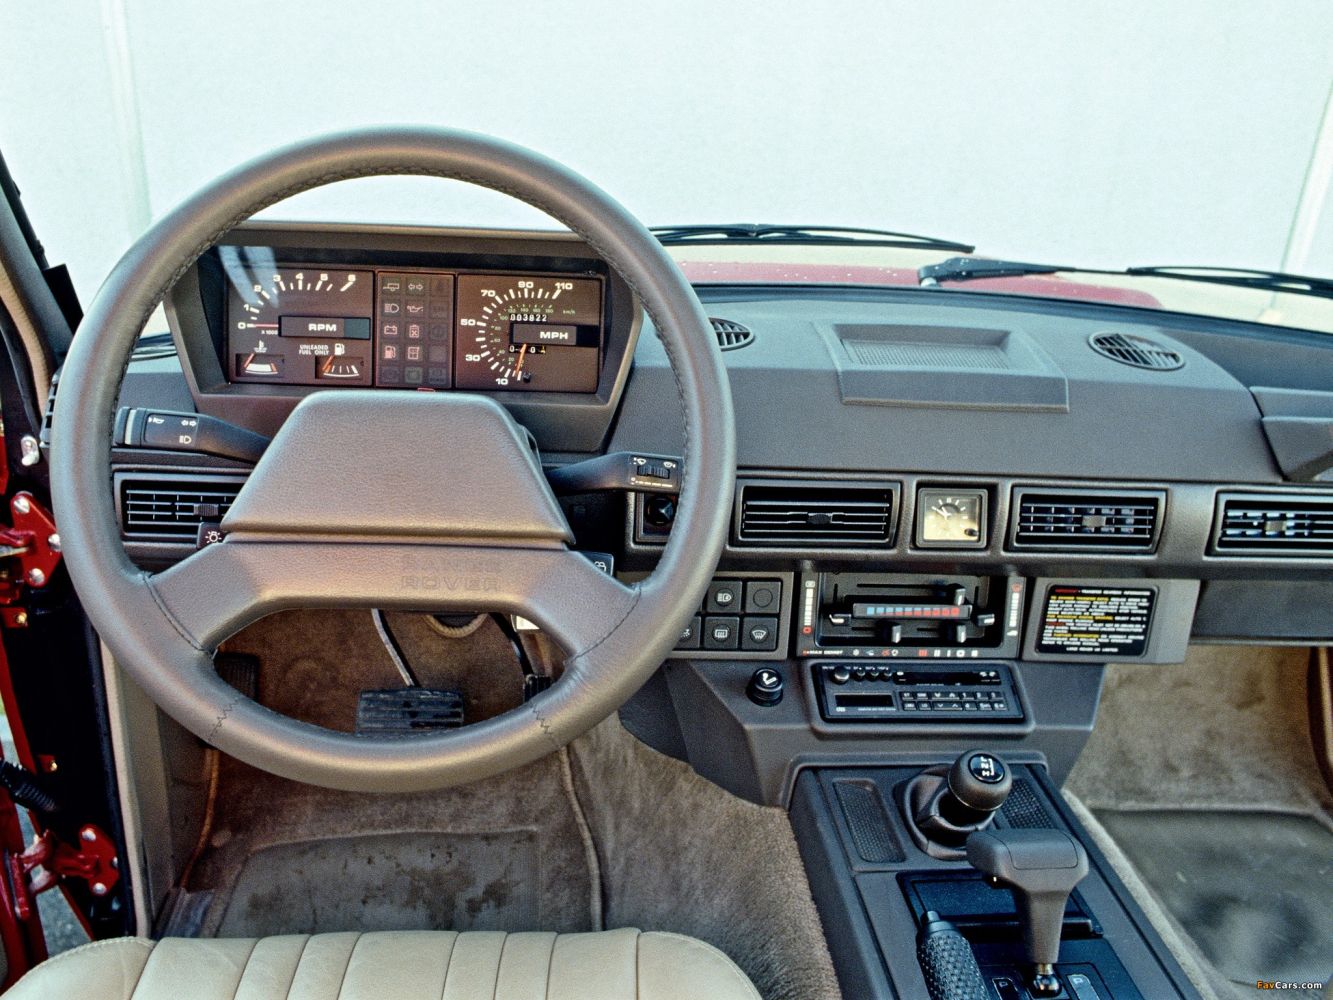 <p>After the introduction of the four-door Range Rover, the model began a steady move out of the utility-vehicle segment and into luxury territory. Leather upholstery and an automatic transmission became available in 1984; a redesigned dashboard and wood interior trim came in 1985. The exposed door hinges of early models were soon hidden for a more refined exterior, and dashboard switches from Austin and Rover luxury sedans were soon incorporated into the Range Rover’s interior. Officially, Range Rovers were not sold in America until 1987, but grey-market imports were common. 1992 saw the introduction of the Range Rover LWB, with a wheelbase stretched by eight inches to add legroom for rear-seat passengers. </p>